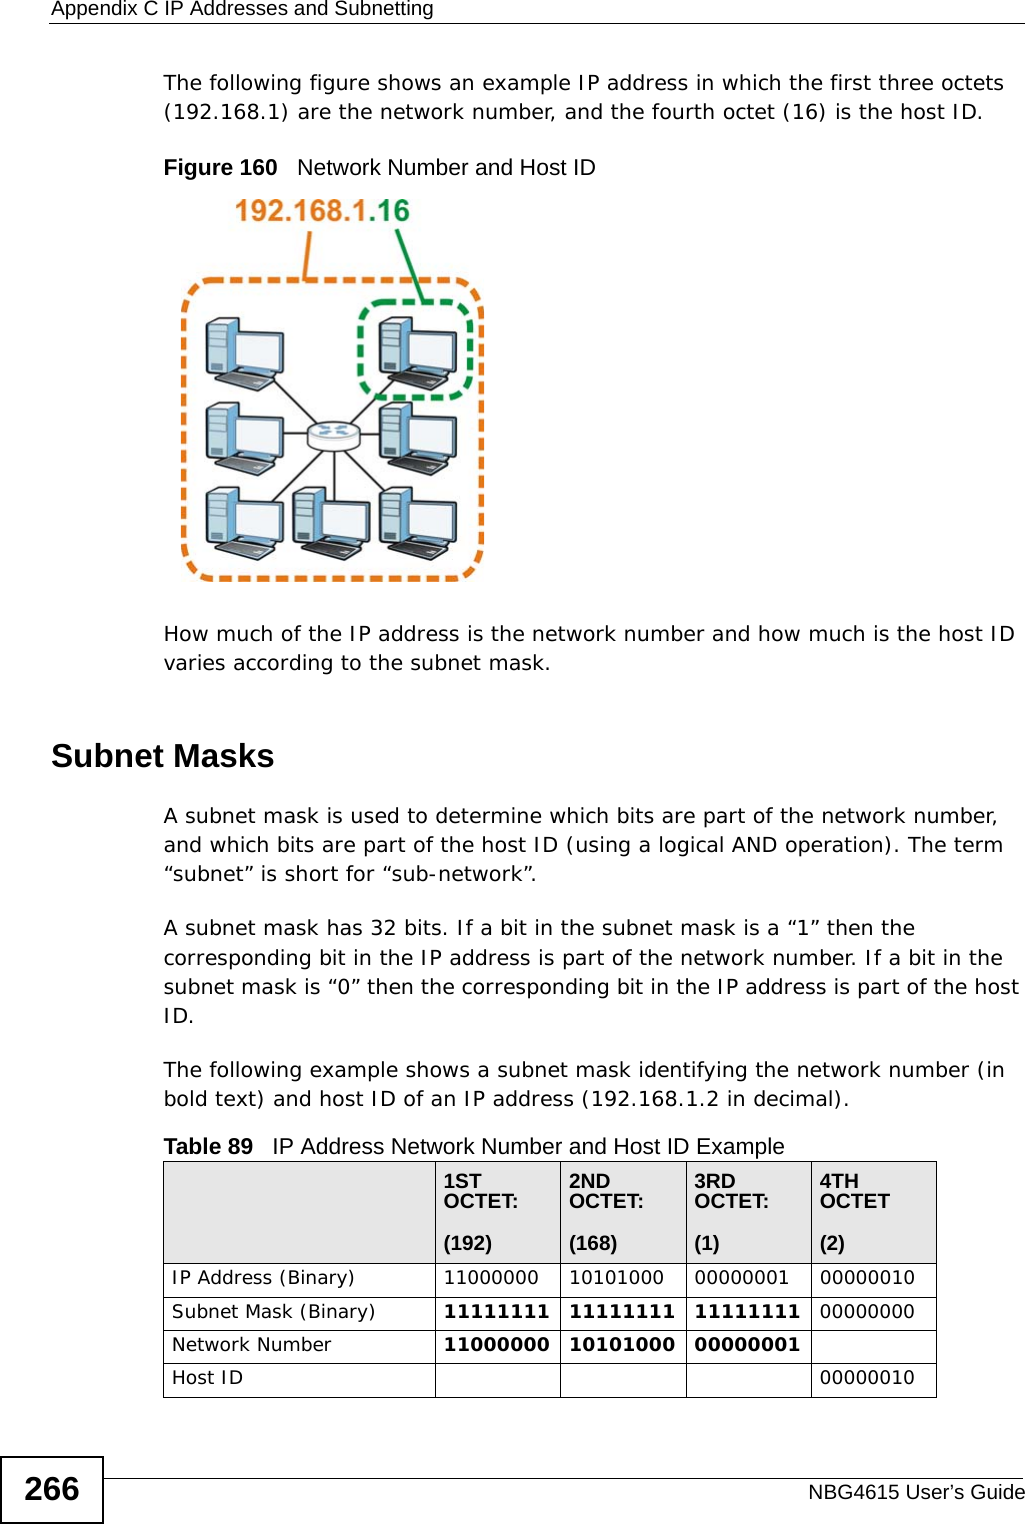 Appendix C IP Addresses and SubnettingNBG4615 User’s Guide266The following figure shows an example IP address in which the first three octets (192.168.1) are the network number, and the fourth octet (16) is the host ID.Figure 160   Network Number and Host IDHow much of the IP address is the network number and how much is the host ID varies according to the subnet mask.  Subnet MasksA subnet mask is used to determine which bits are part of the network number, and which bits are part of the host ID (using a logical AND operation). The term “subnet” is short for “sub-network”.A subnet mask has 32 bits. If a bit in the subnet mask is a “1” then the corresponding bit in the IP address is part of the network number. If a bit in the subnet mask is “0” then the corresponding bit in the IP address is part of the host ID. The following example shows a subnet mask identifying the network number (in bold text) and host ID of an IP address (192.168.1.2 in decimal).Table 89   IP Address Network Number and Host ID Example1ST OCTET:(192)2ND OCTET:(168)3RD OCTET:(1)4TH OCTET(2)IP Address (Binary) 11000000 10101000 00000001 00000010Subnet Mask (Binary) 11111111 11111111 11111111 00000000Network Number 11000000 10101000 00000001Host ID 00000010